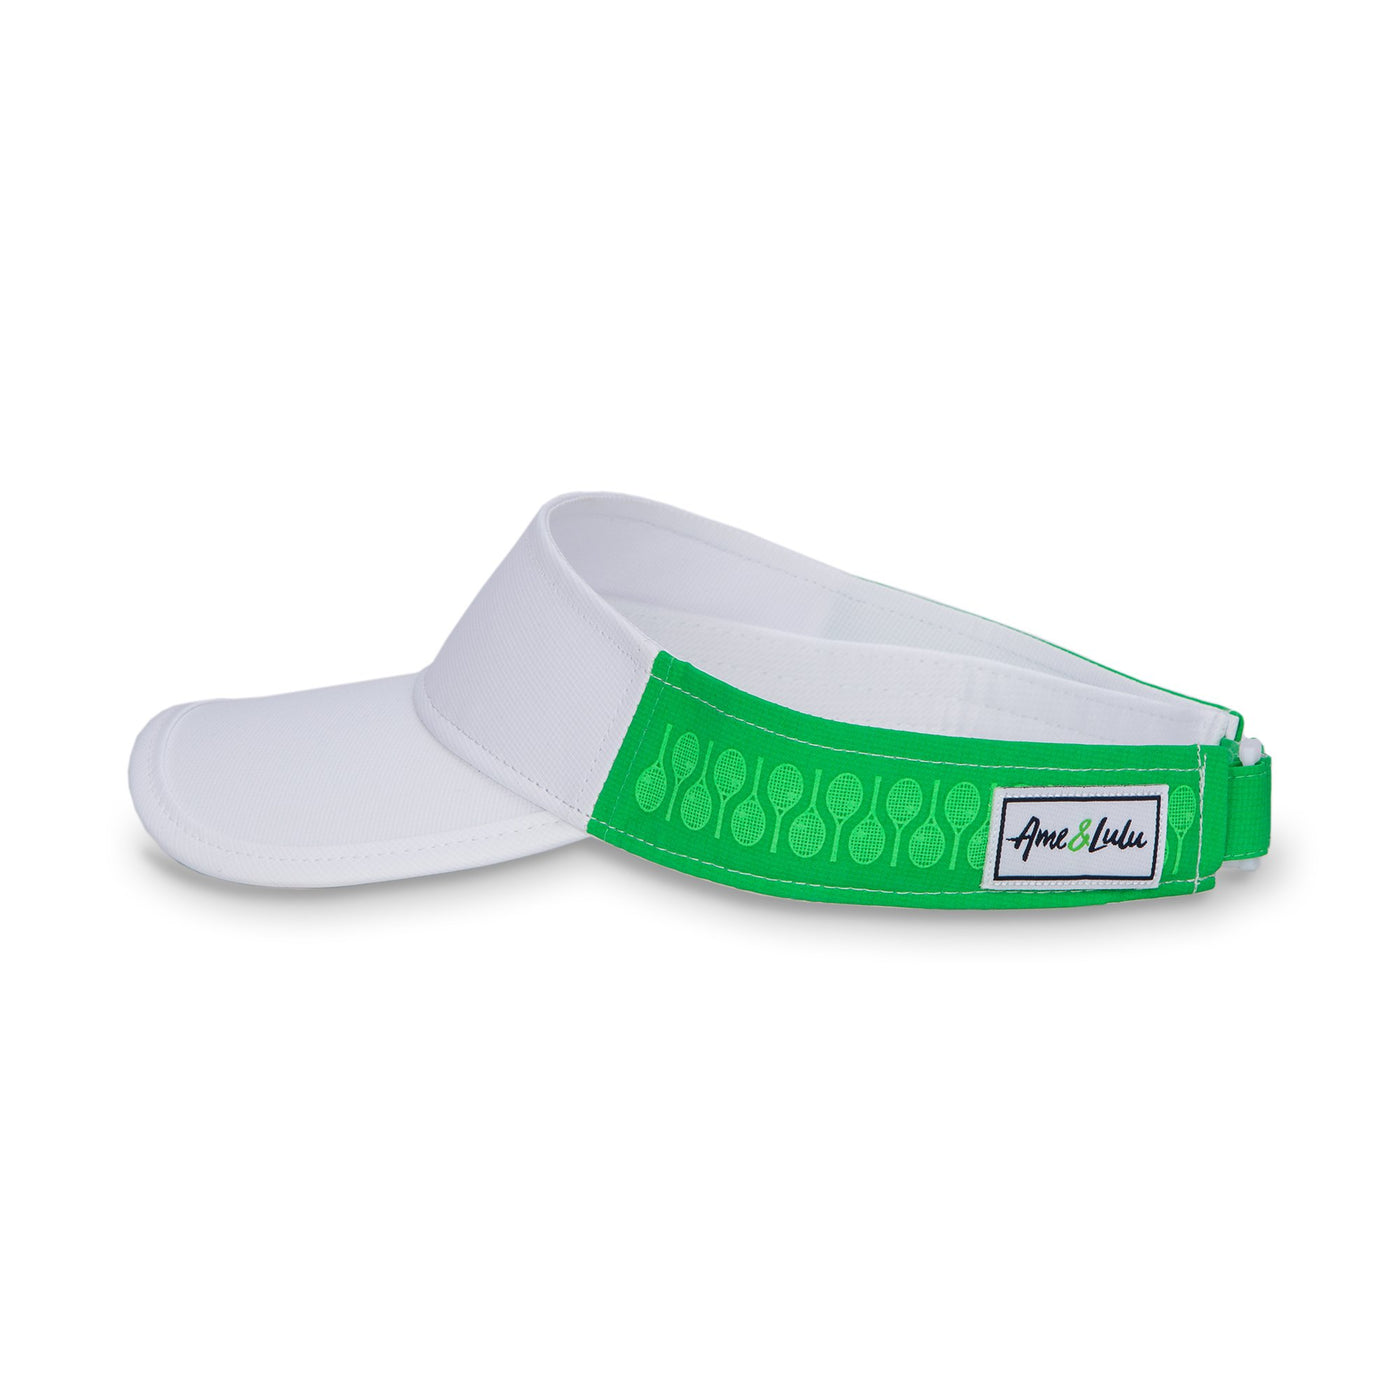 Side view of green tonal Racquets Head in the game visor. Front of visor is white and the sides are dark green with lime green racquets printed.